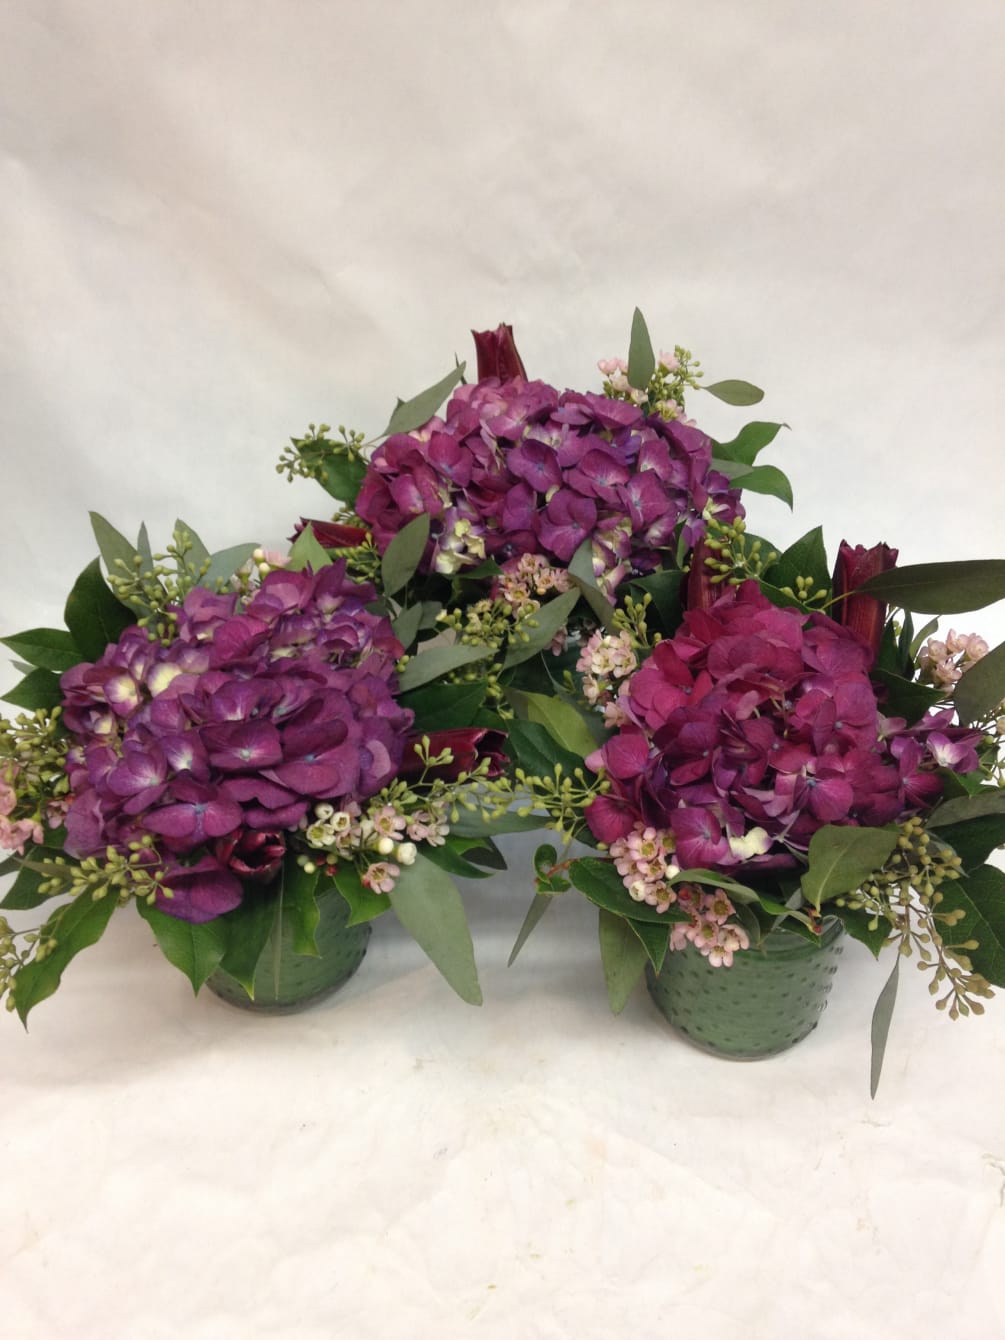 These centerpieces are perfect for any event and each come complete with